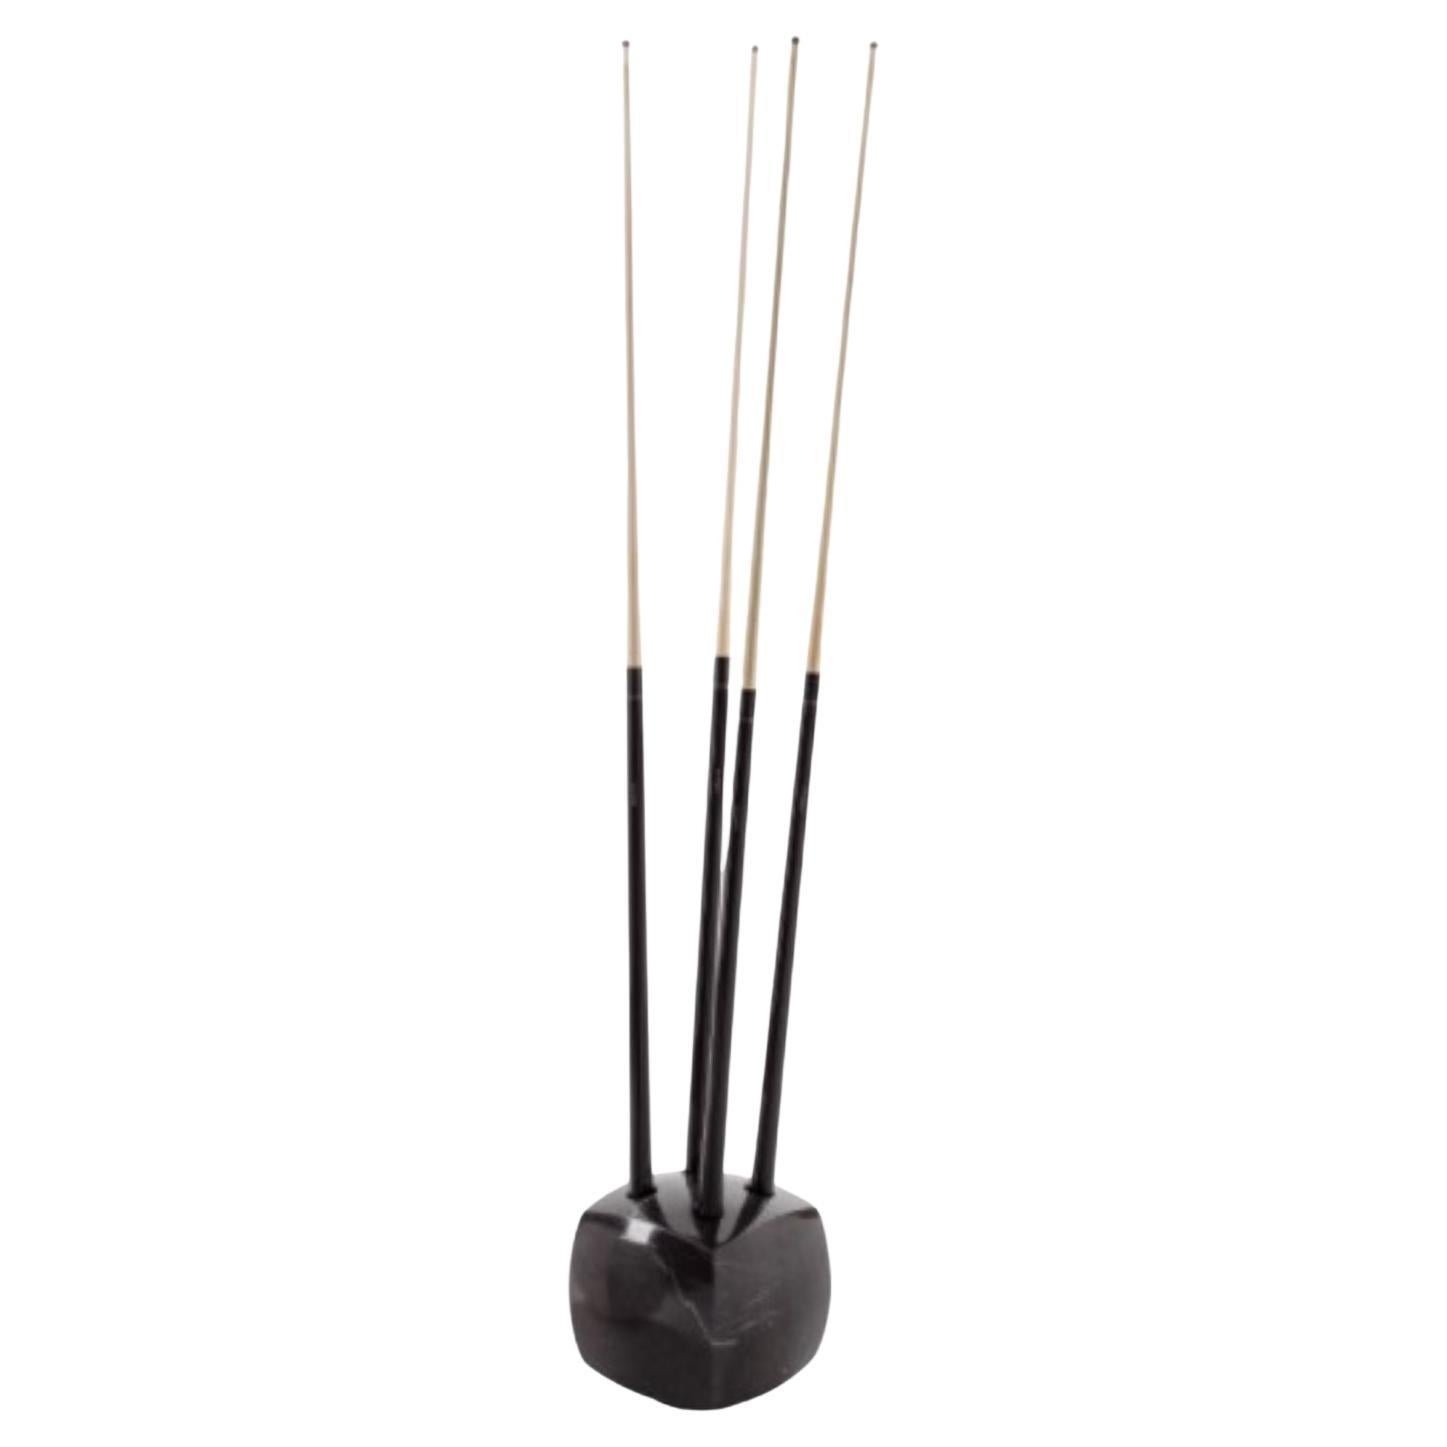 Set of 4 Longoni Cue Sticks and Tocco Cue Rack by Impatia